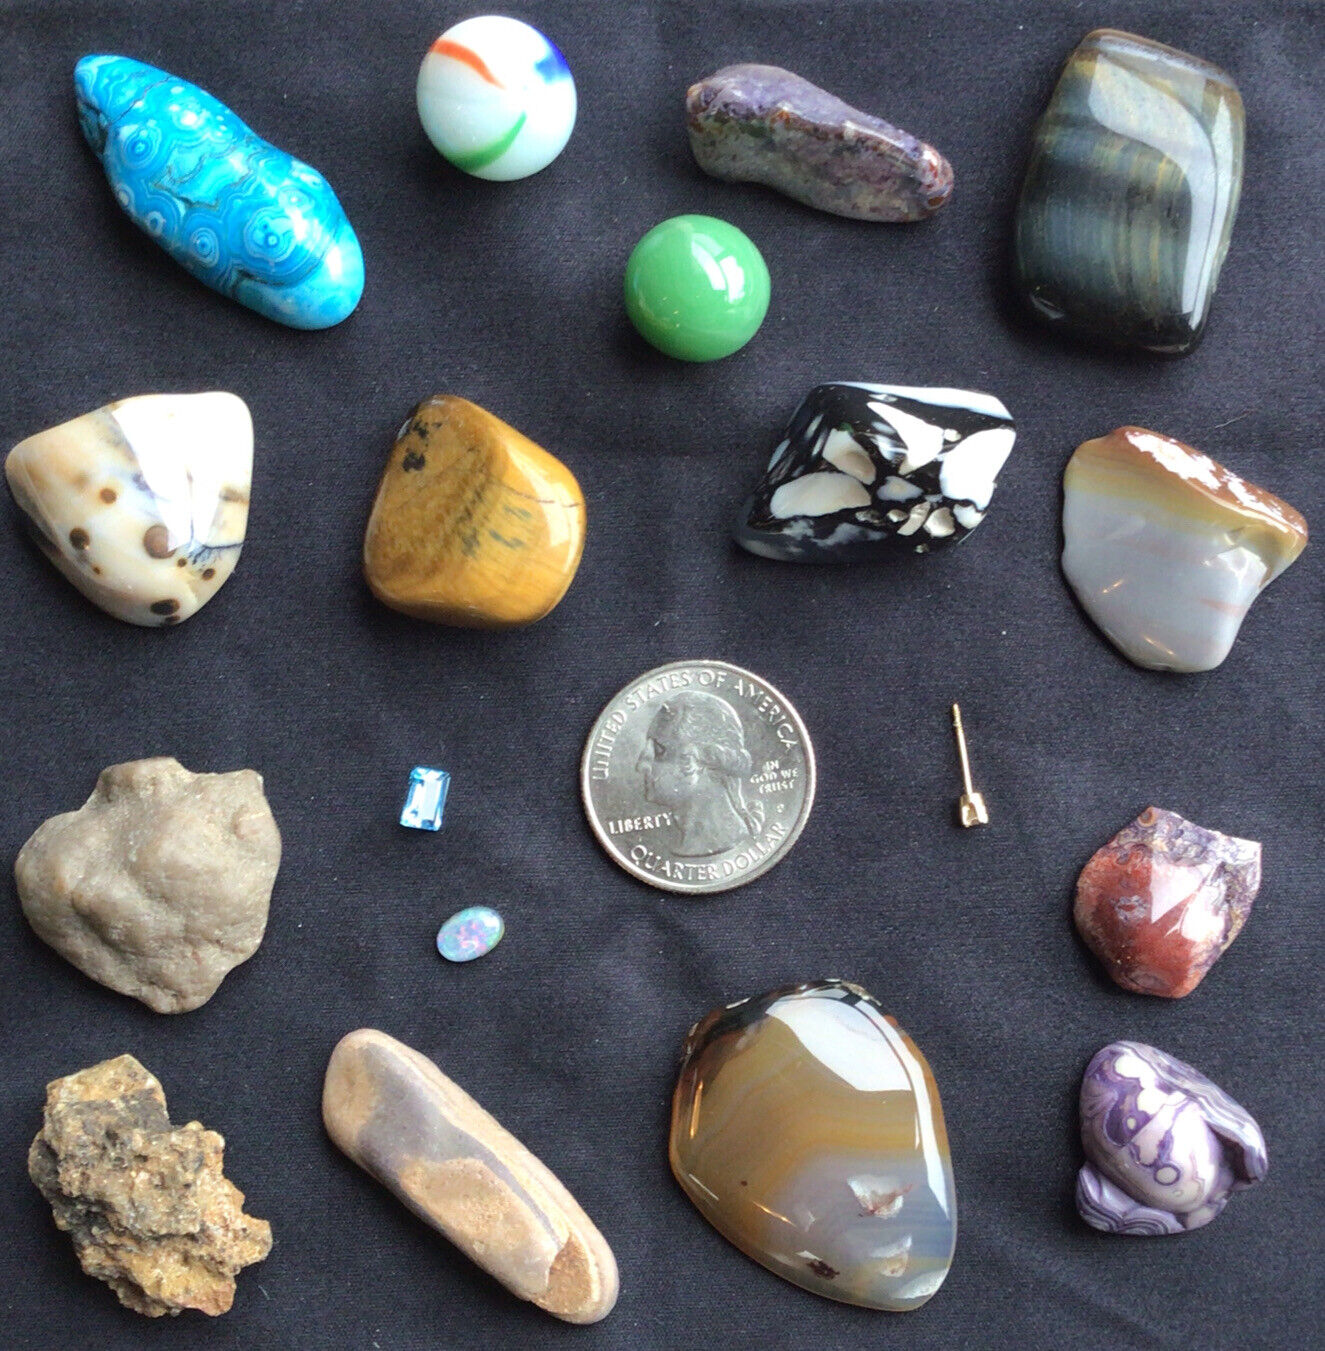 14 Rare Healing and Jewelry Stones Polished